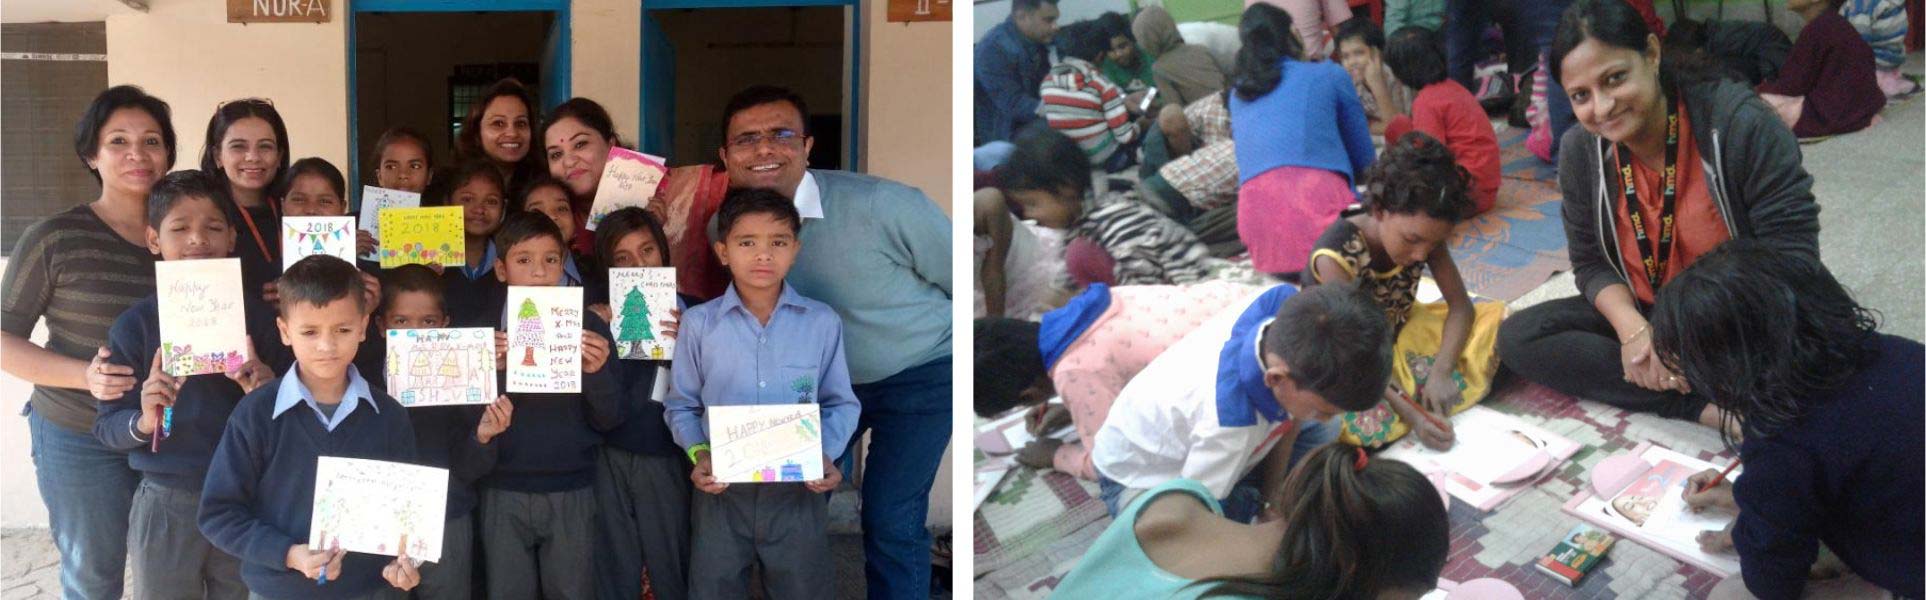 HMD Global celebrates its first year in India with Smile Foundation